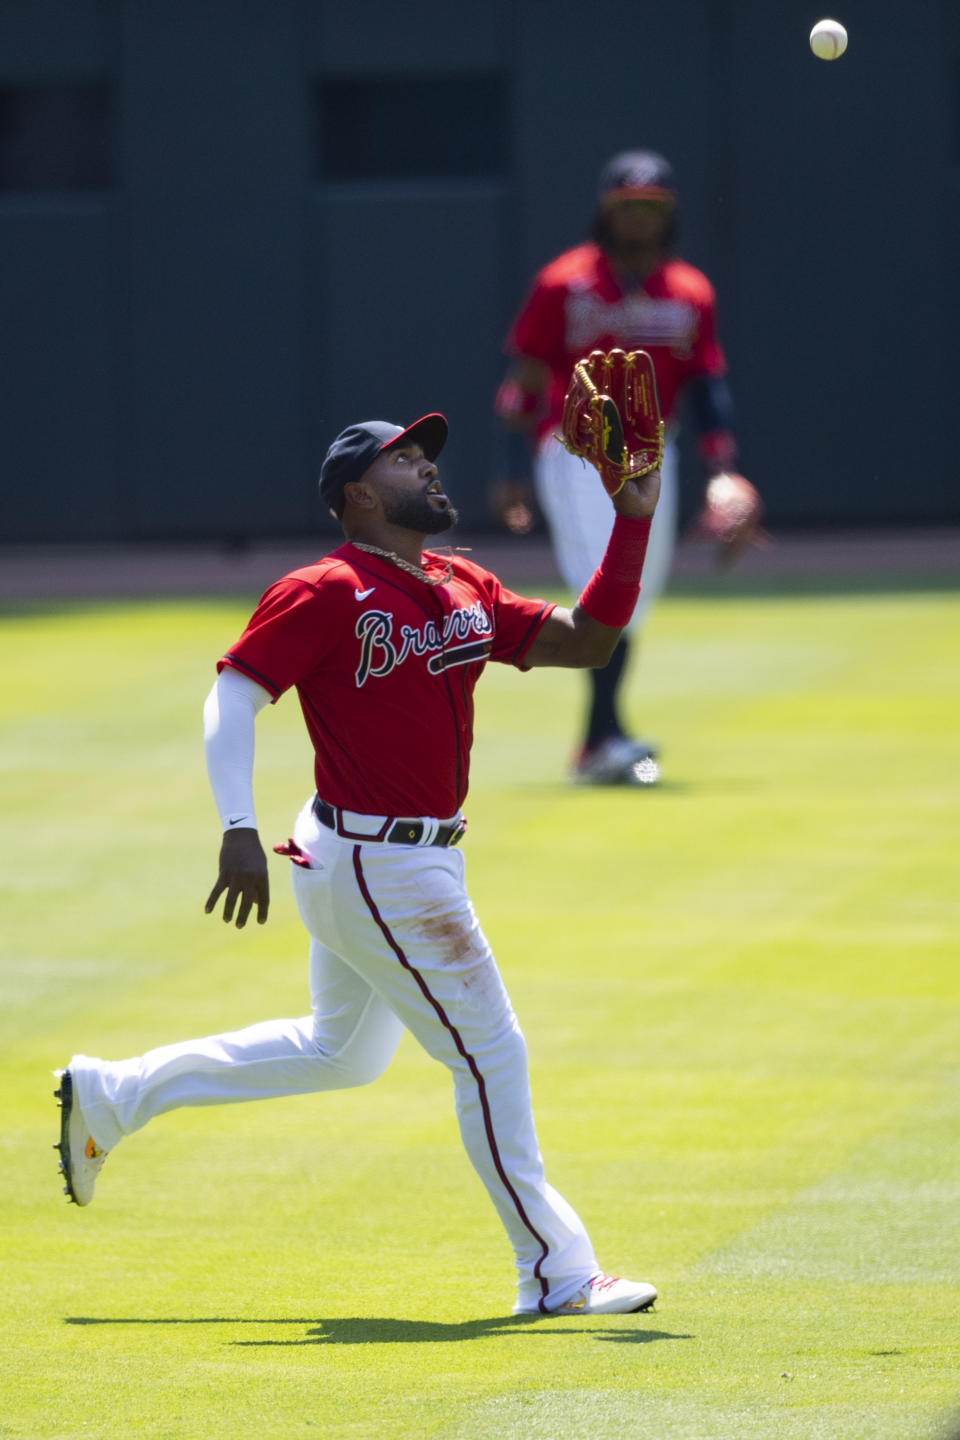 Atlanta Braves left fielder Marcell Ozuna catches a fly ball hit by Washington Nationals' Adam Eaton during the first inning of a baseball game Sunday, Sept. 6, 2020, in Atlanta.(AP Photo/John Amis)